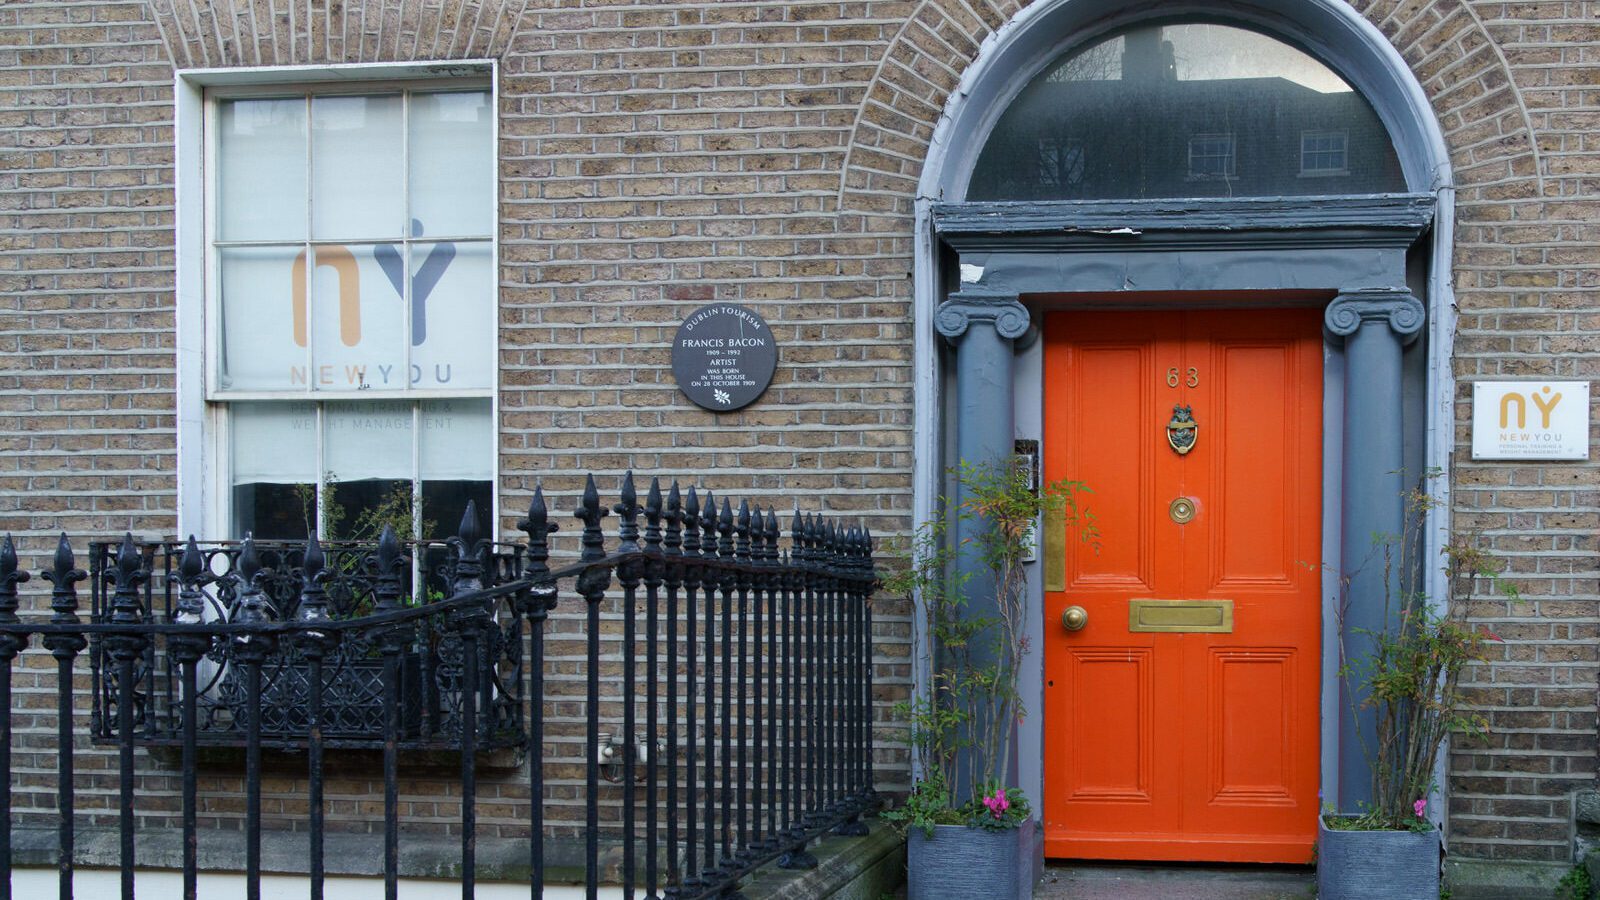 FRANCIS BACON LIVED HERE [HE WAS BORN IN 1909 AT NUMBER 63 LOWER BAGGOT STREET]-228118-1